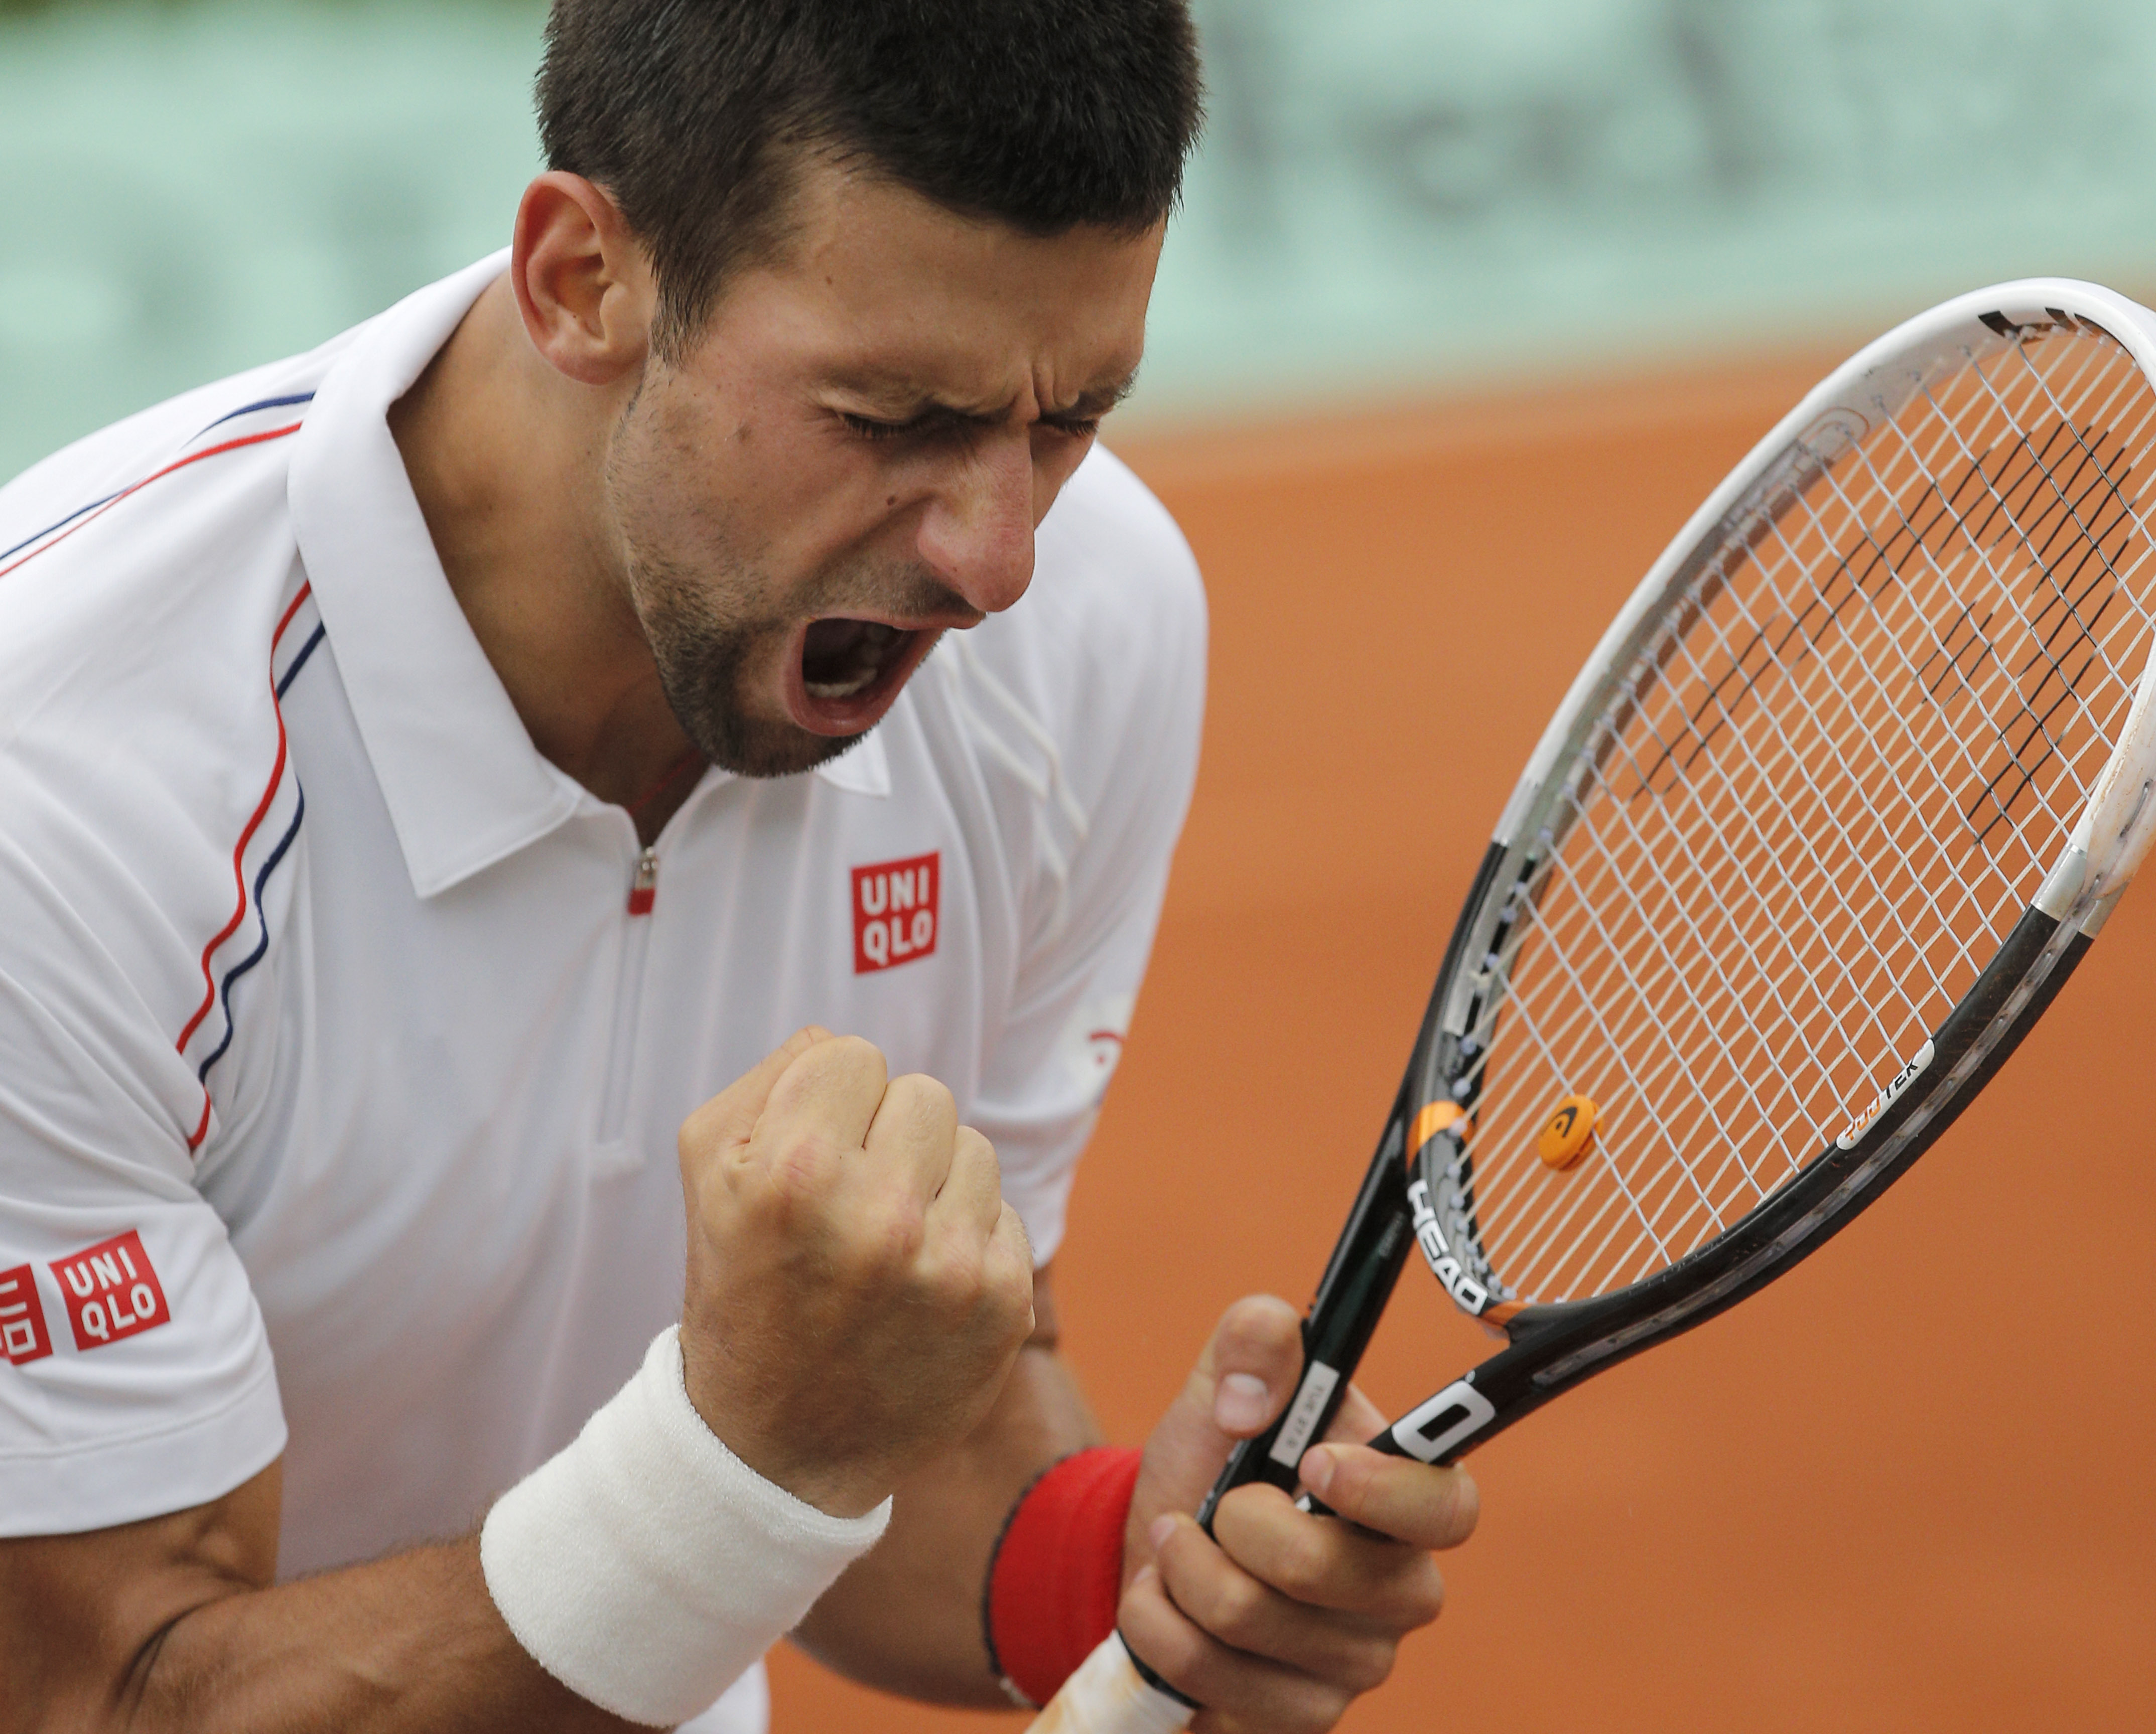 French Open Djokovic saves 4 match points in dramatic victory; Federer